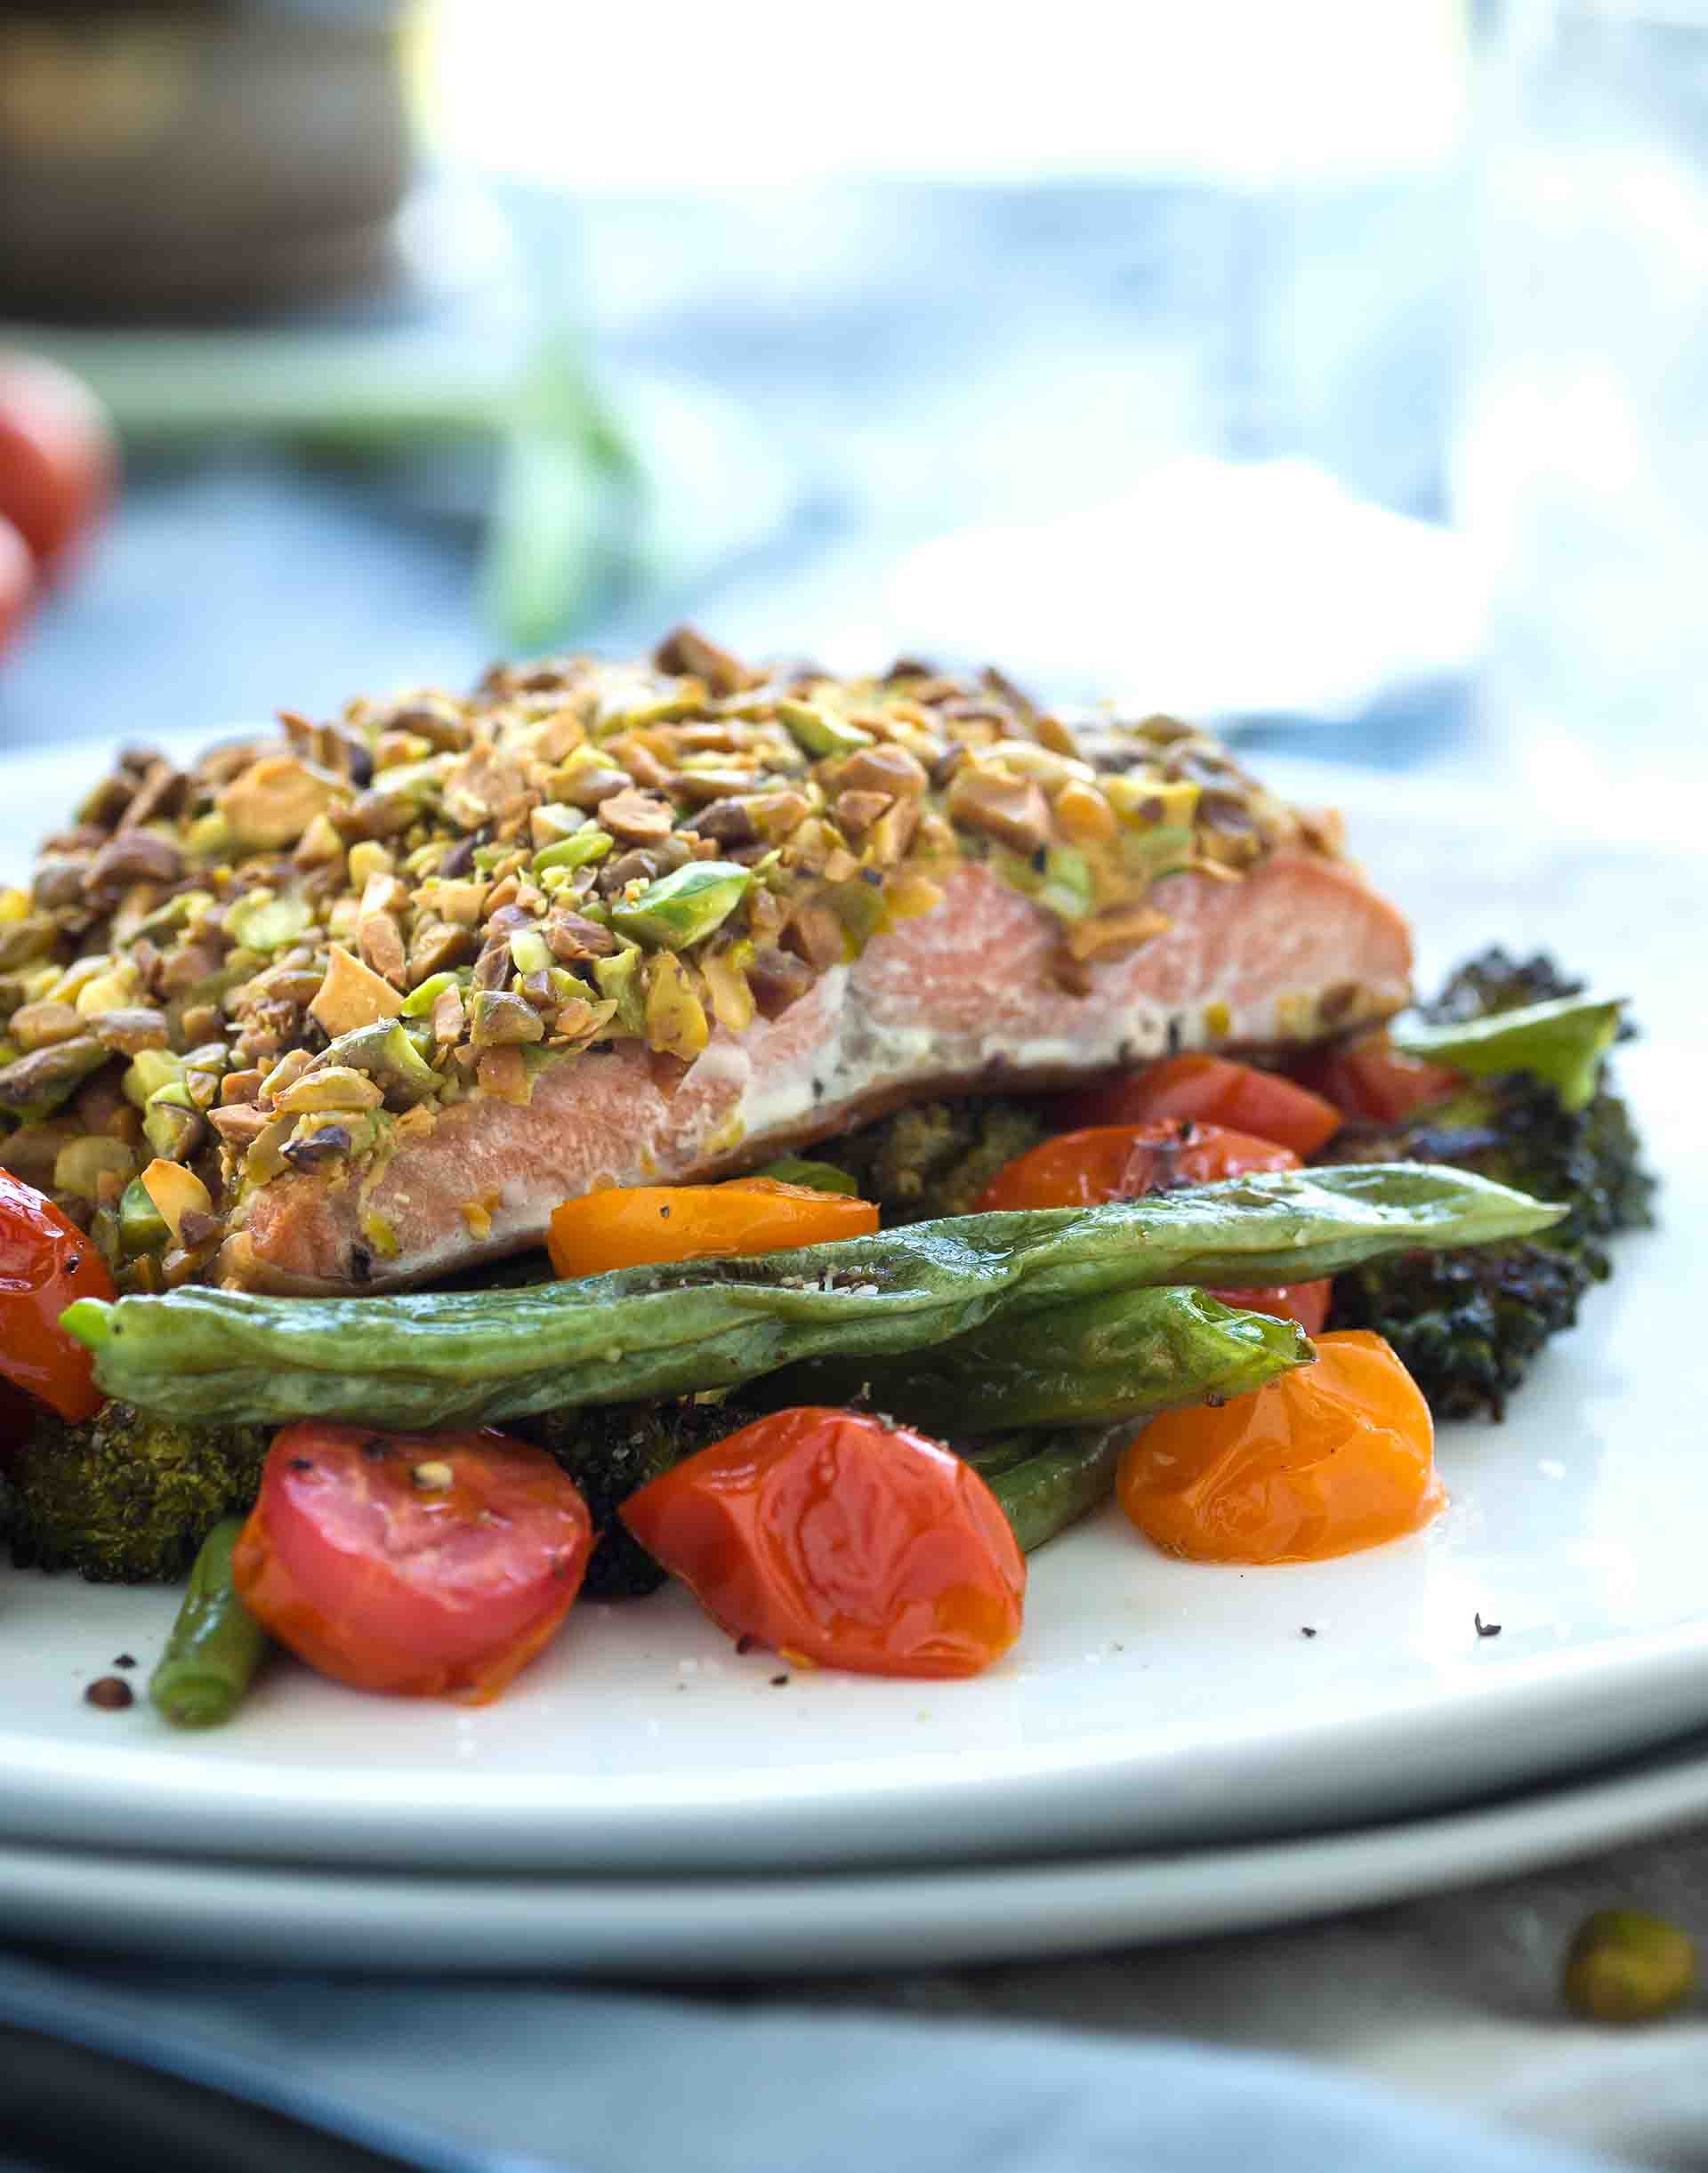 Pistachio-Crusted Baked Salmon